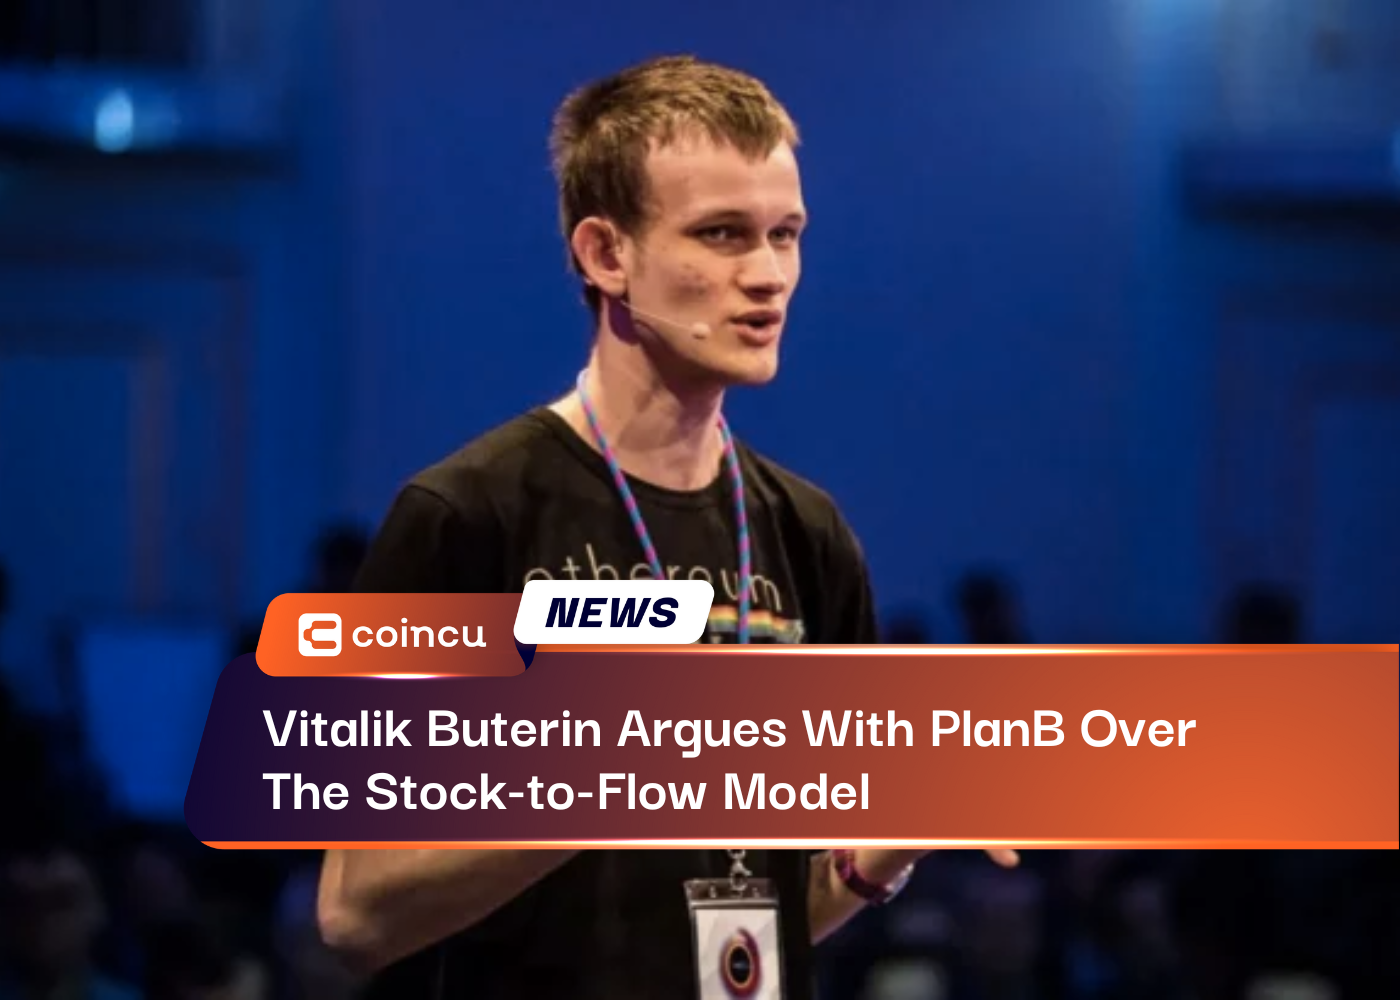 Vitalik Buterin Argues With PlanB Over The Stock-to-Flow Model